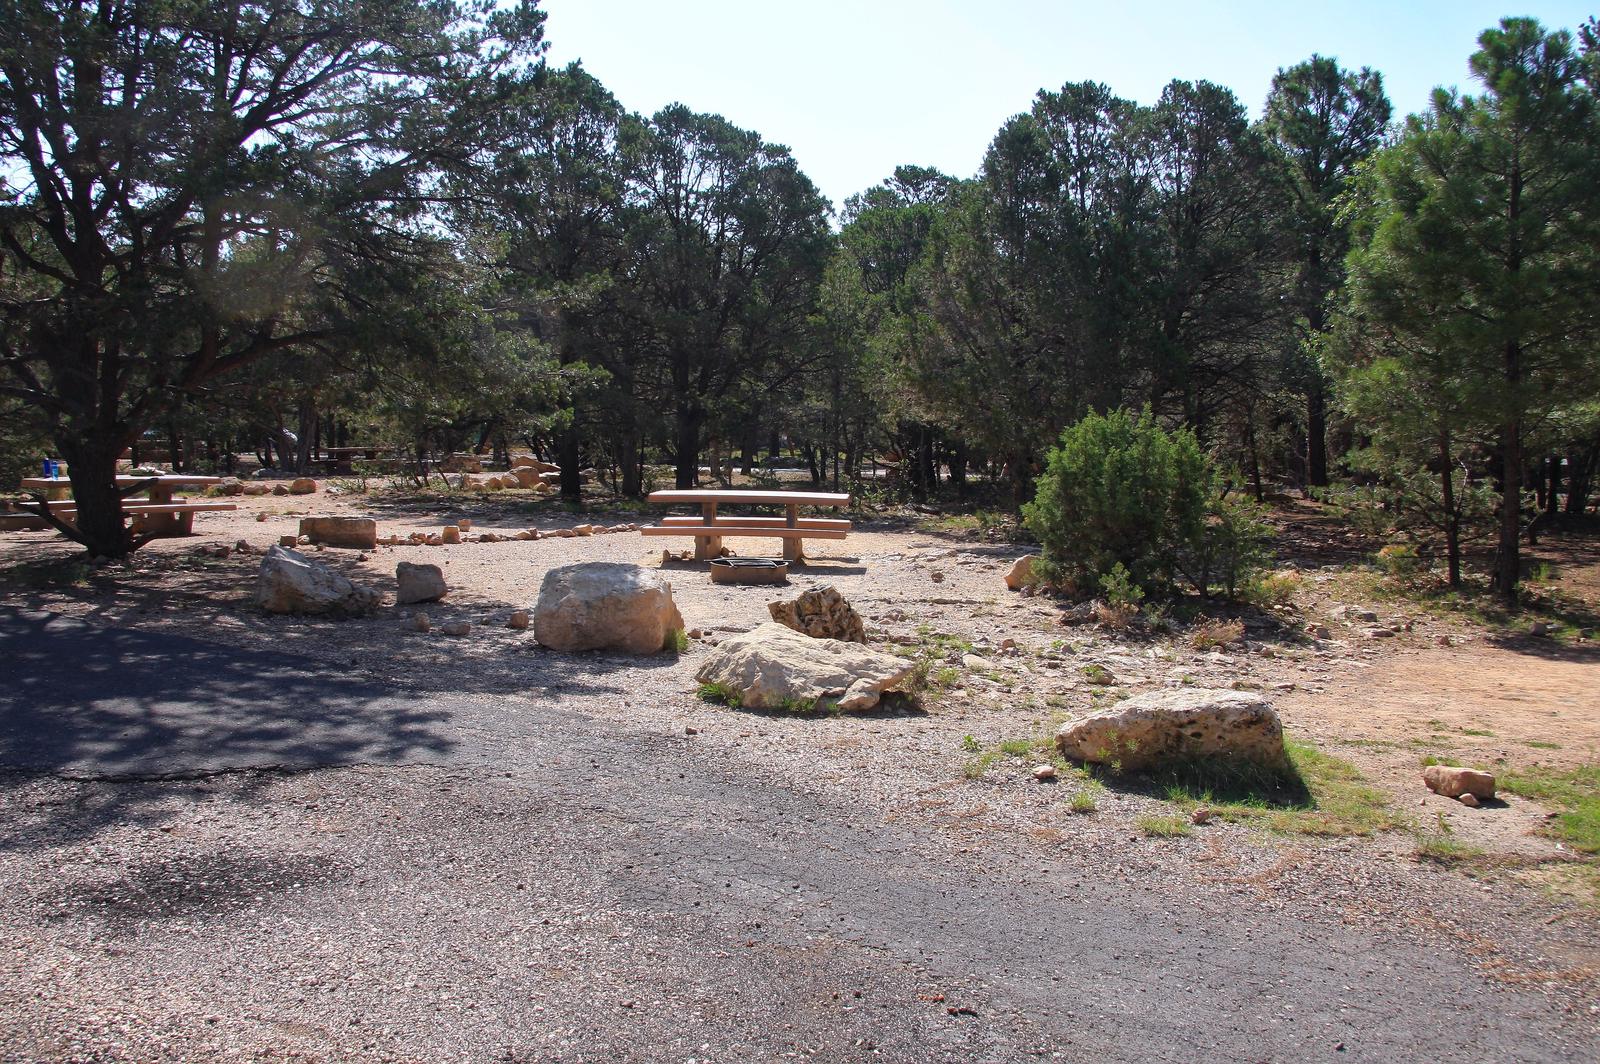 Picnic table, fire pit, and parking spot, Mather CampgroundPicnic table, fire pit, and parking spot for Pine Loop 266A, Mather Campground